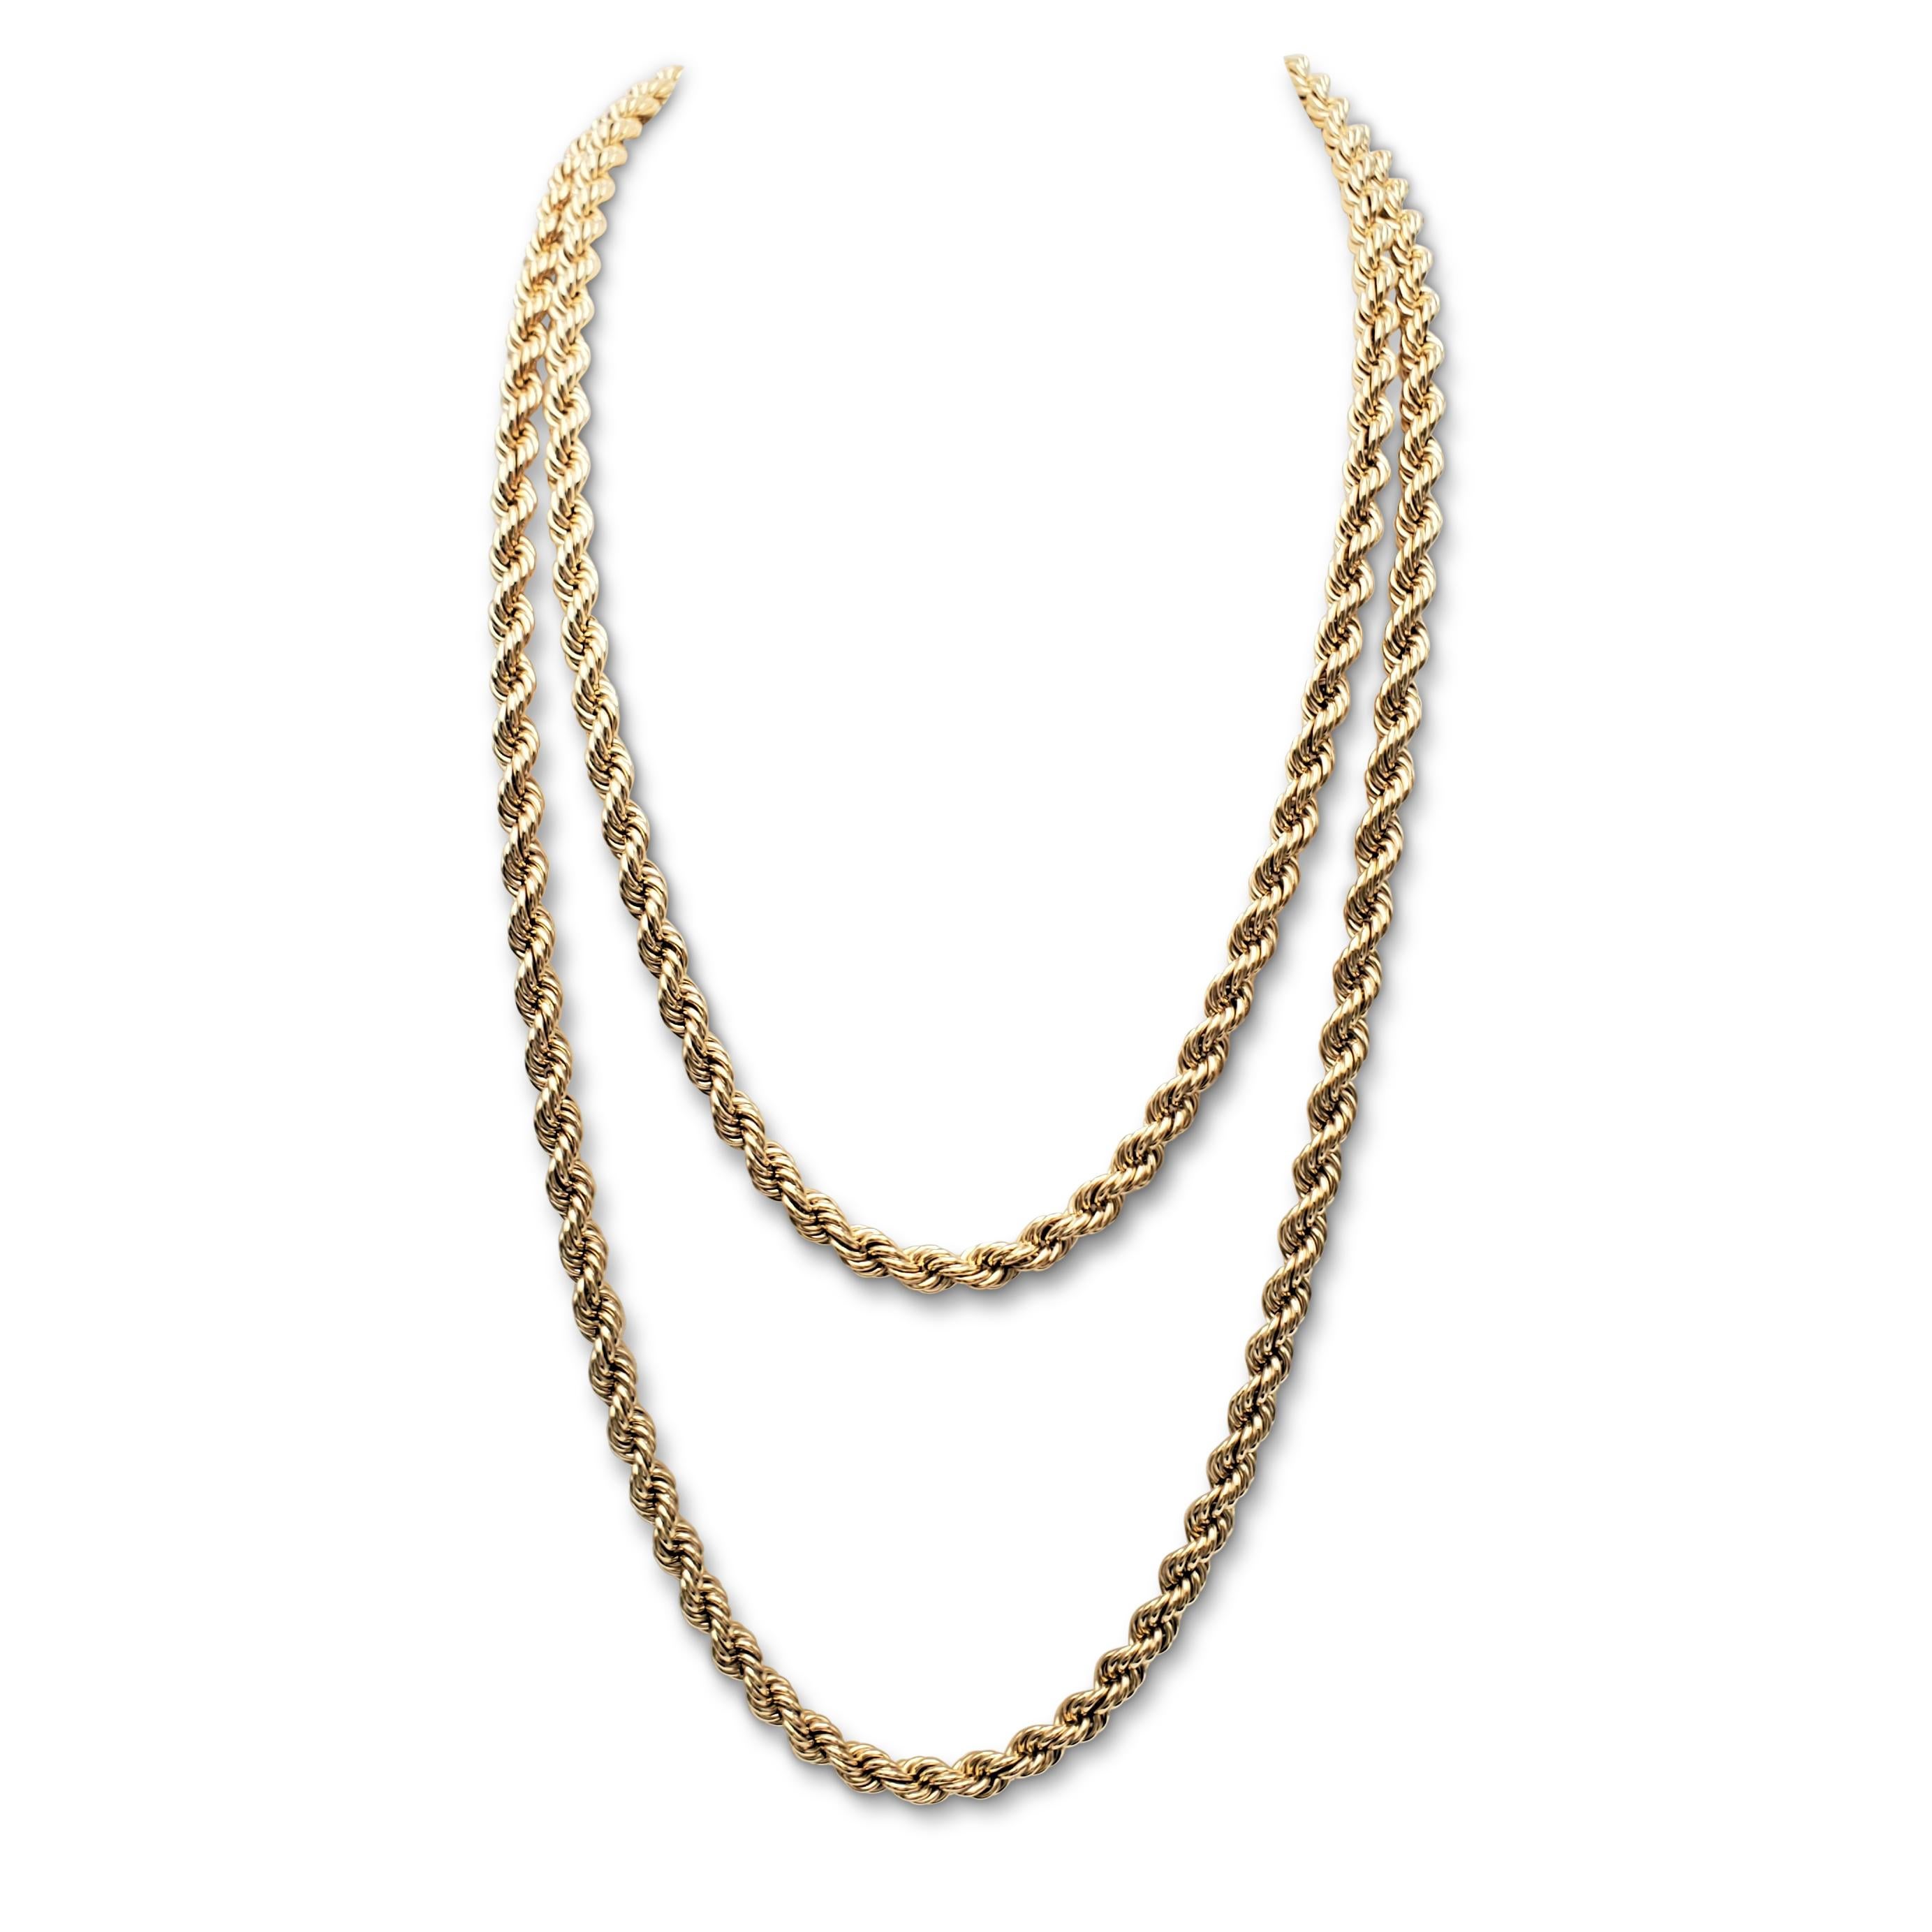 Authentic vintage Tiffany & Co. extra-long twisted rope chain necklace crafted in 14 karat yellow gold. Signed T&Co., 585. The necklace measures 60 inches in length. Not presented with the original box or papers. CIRCA 1980-1990s.

Necklace Length: